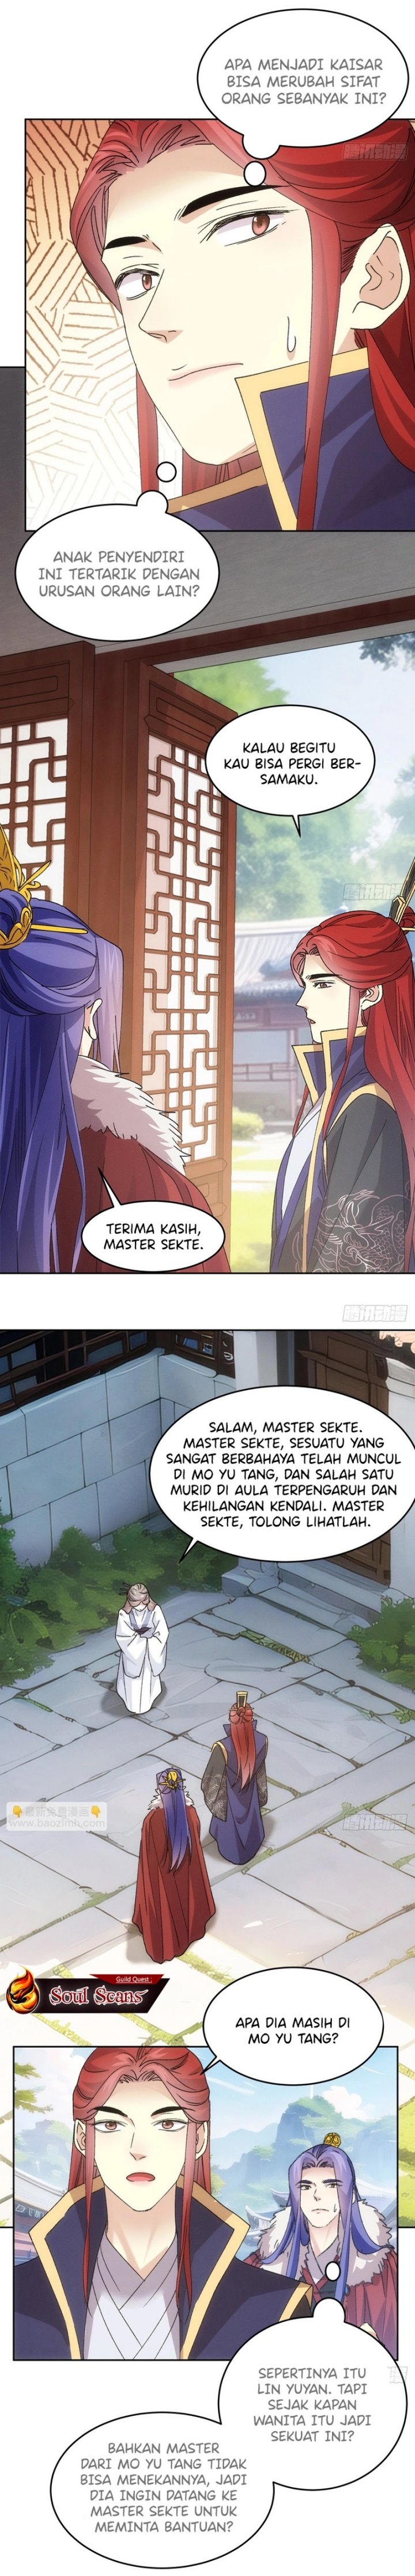 Dilarang COPAS - situs resmi www.mangacanblog.com - Komik i just dont play the card according to the routine 187 - chapter 187 188 Indonesia i just dont play the card according to the routine 187 - chapter 187 Terbaru 6|Baca Manga Komik Indonesia|Mangacan